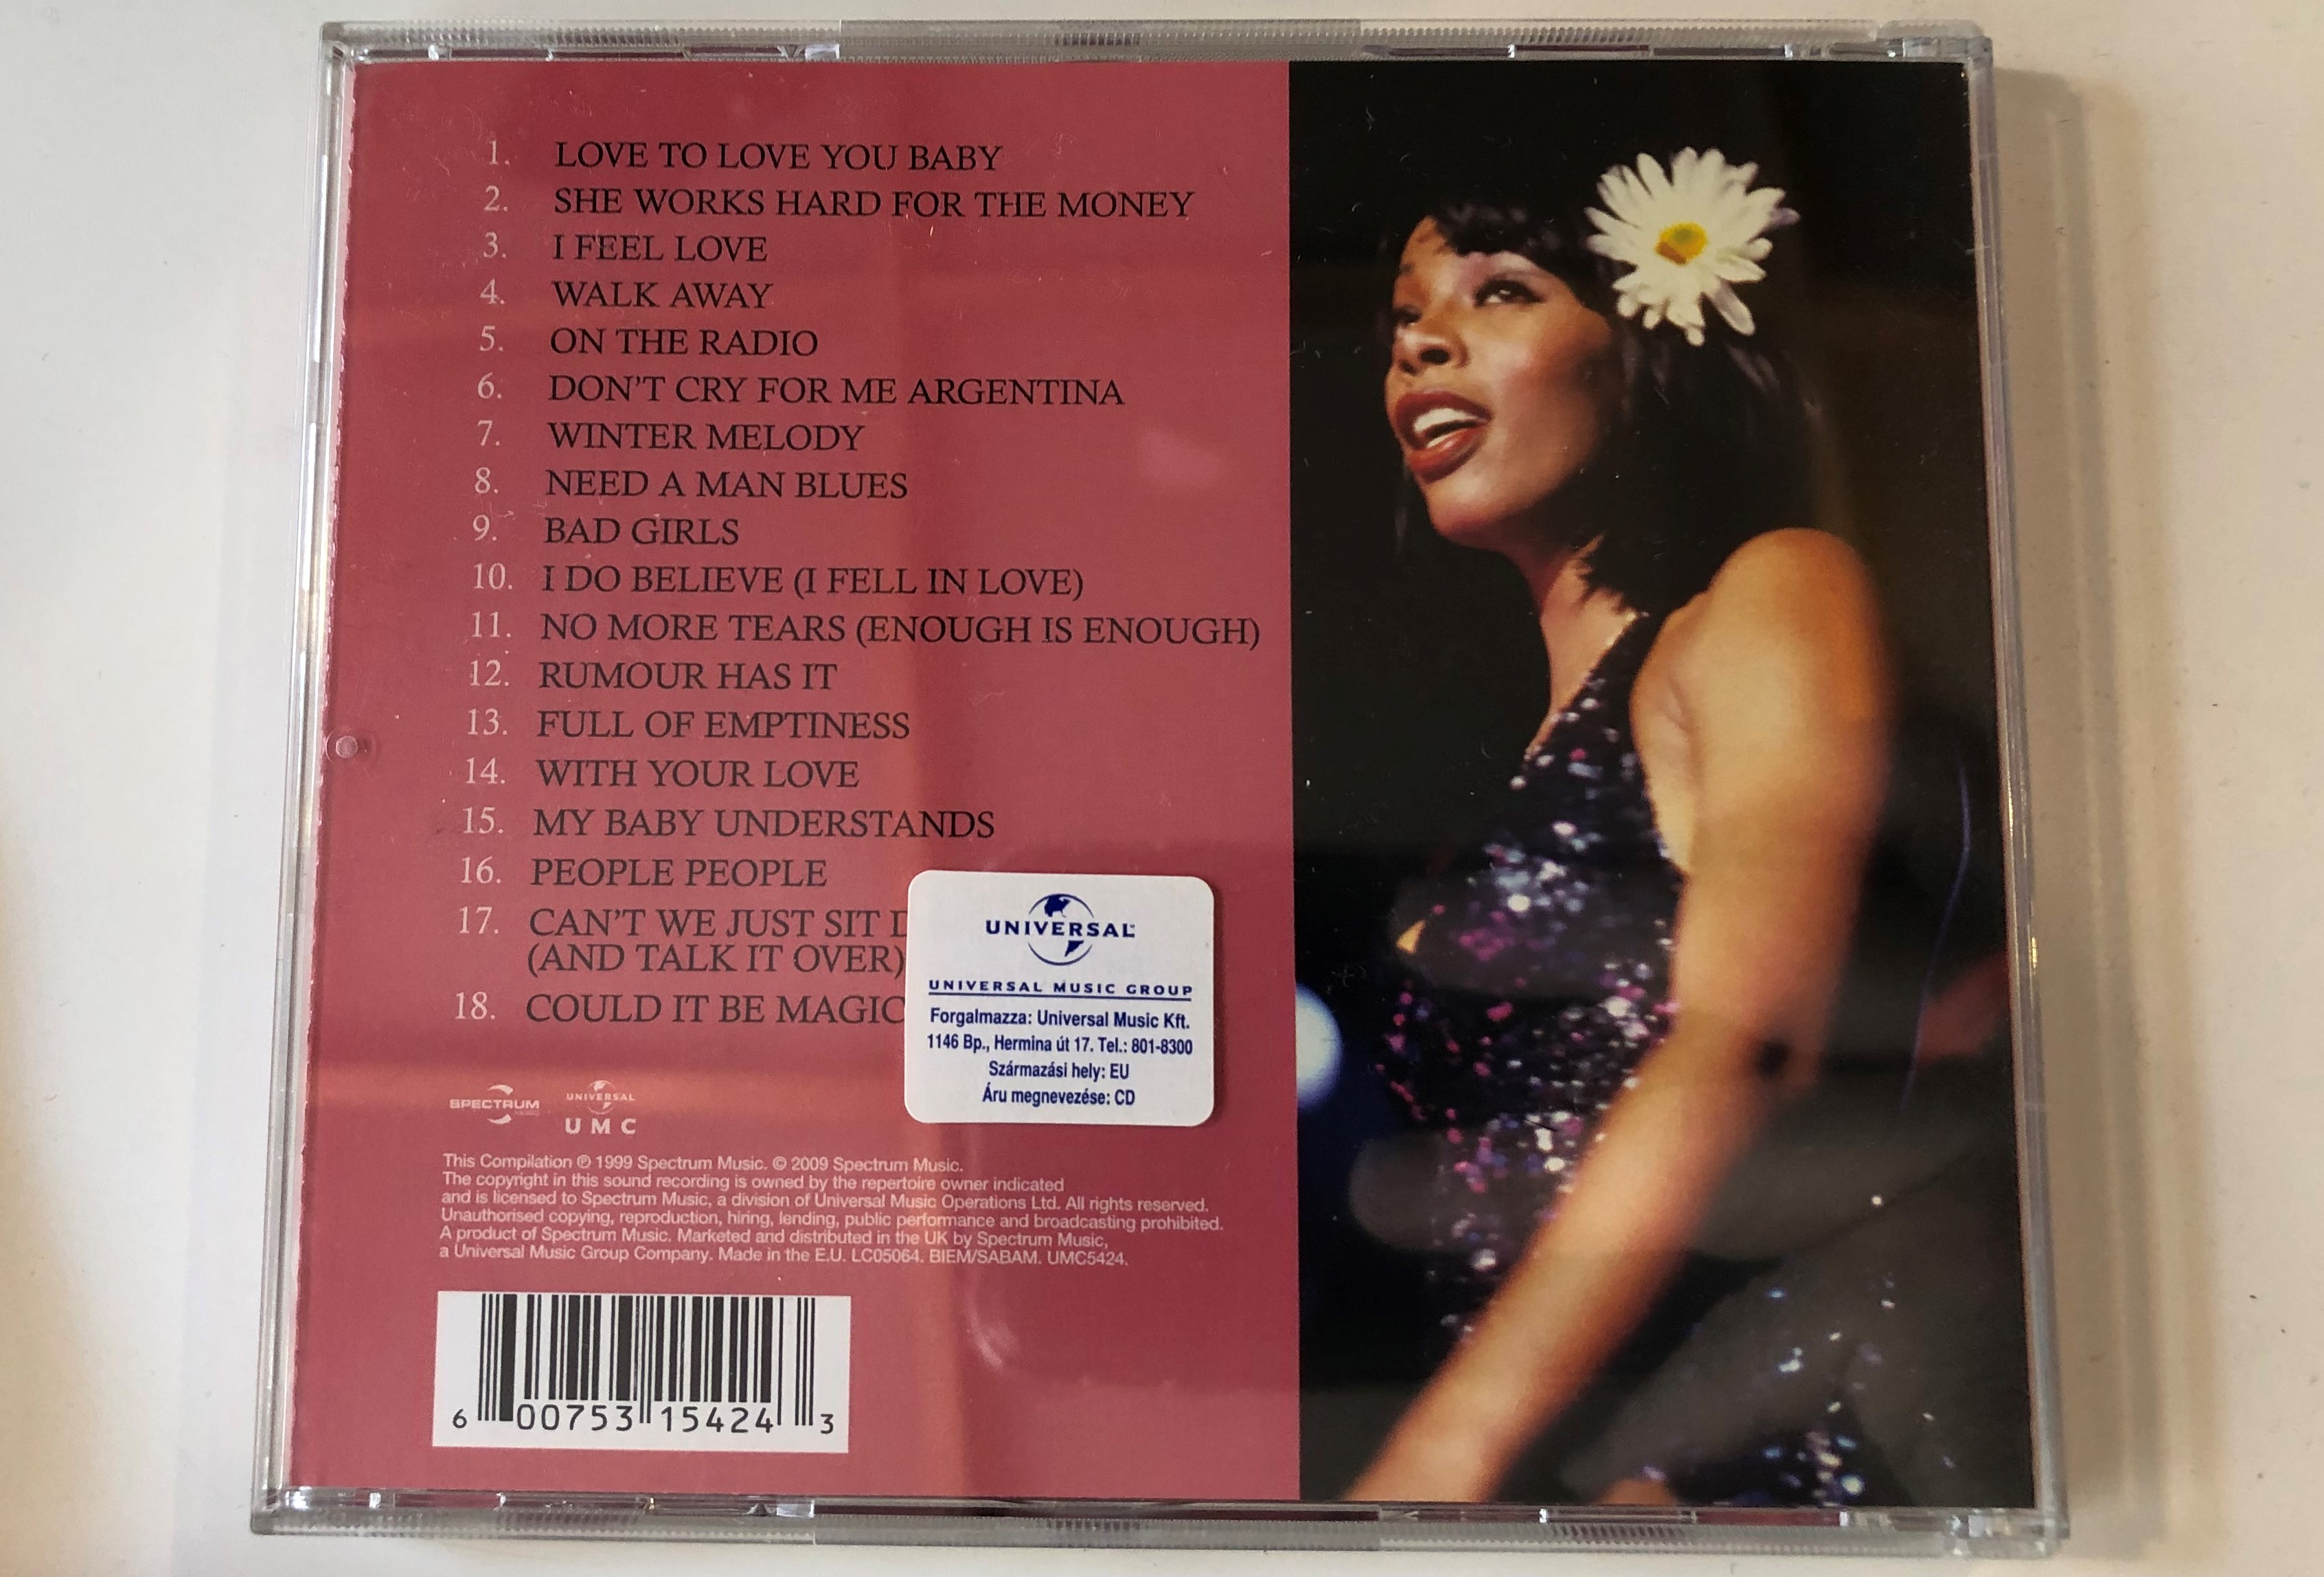 classic-donna-summer-the-masters-collection-spectrum-music-audio-cd-2009-umc5424-2-.jpg